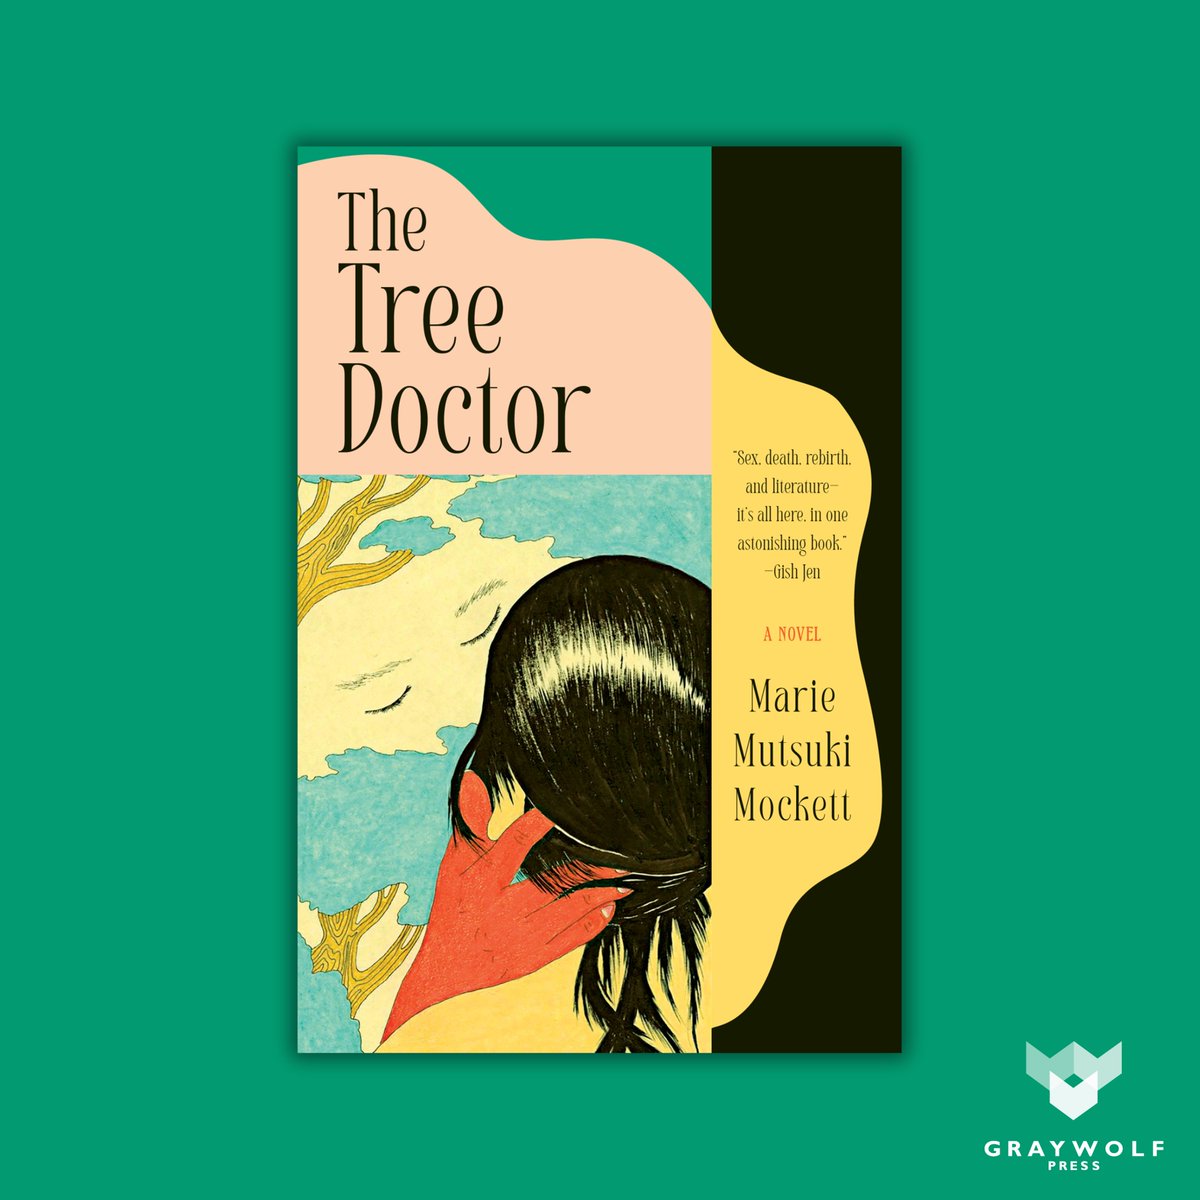 Happy pub. day to Marie Mutsuki Mockett's THE TREE DOCTOR, a powerful, beautifully written novel full of bodily pleasure, intense observation of nature, and a profound reckoning with the passage of time both within ourselves and in the world we inhabit. bookshop.org/p/books/the-tr…